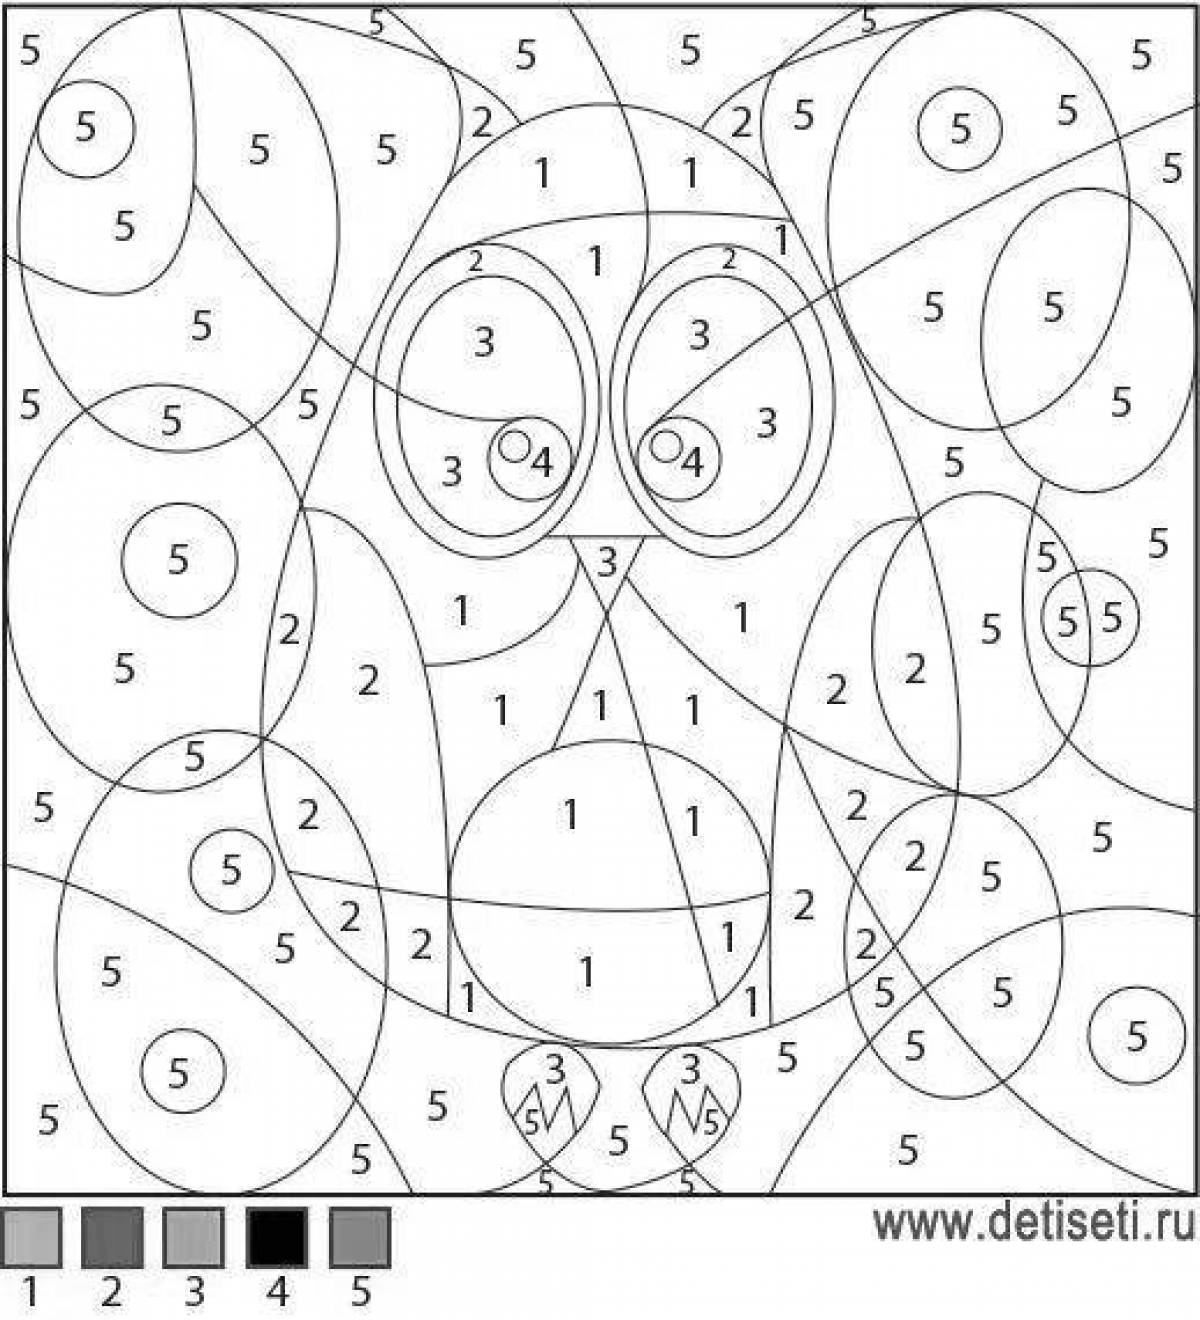 Animated coloring page by blotched spots